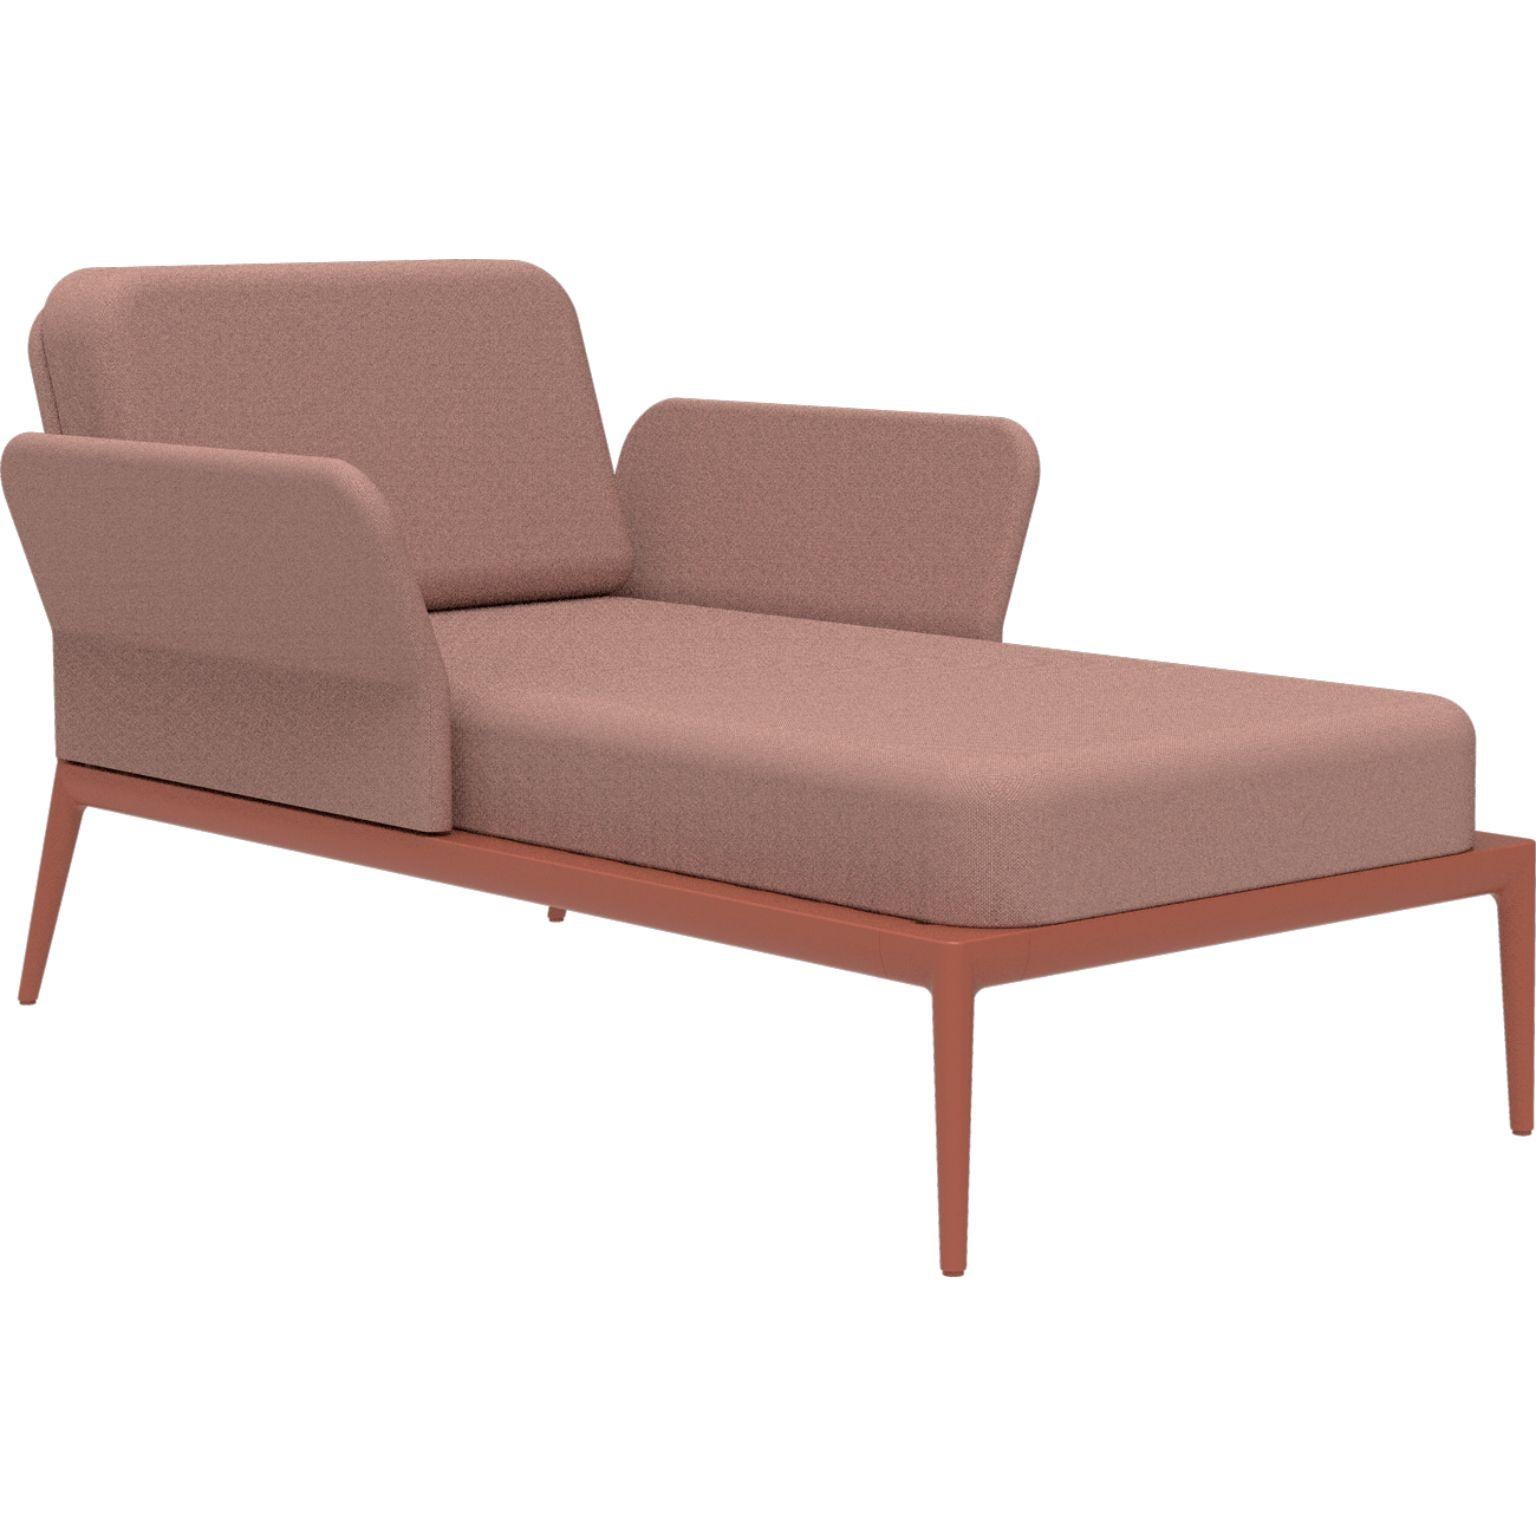 Cover salmon divan by MOWEE.
Dimensions: D91 x W155 x H81 cm (seat height 42 cm).
Material: Aluminum and upholstery.
Weight: 30 kg.
Also available in different colors and finishes.

An unmistakable collection for its beauty and robustness. A